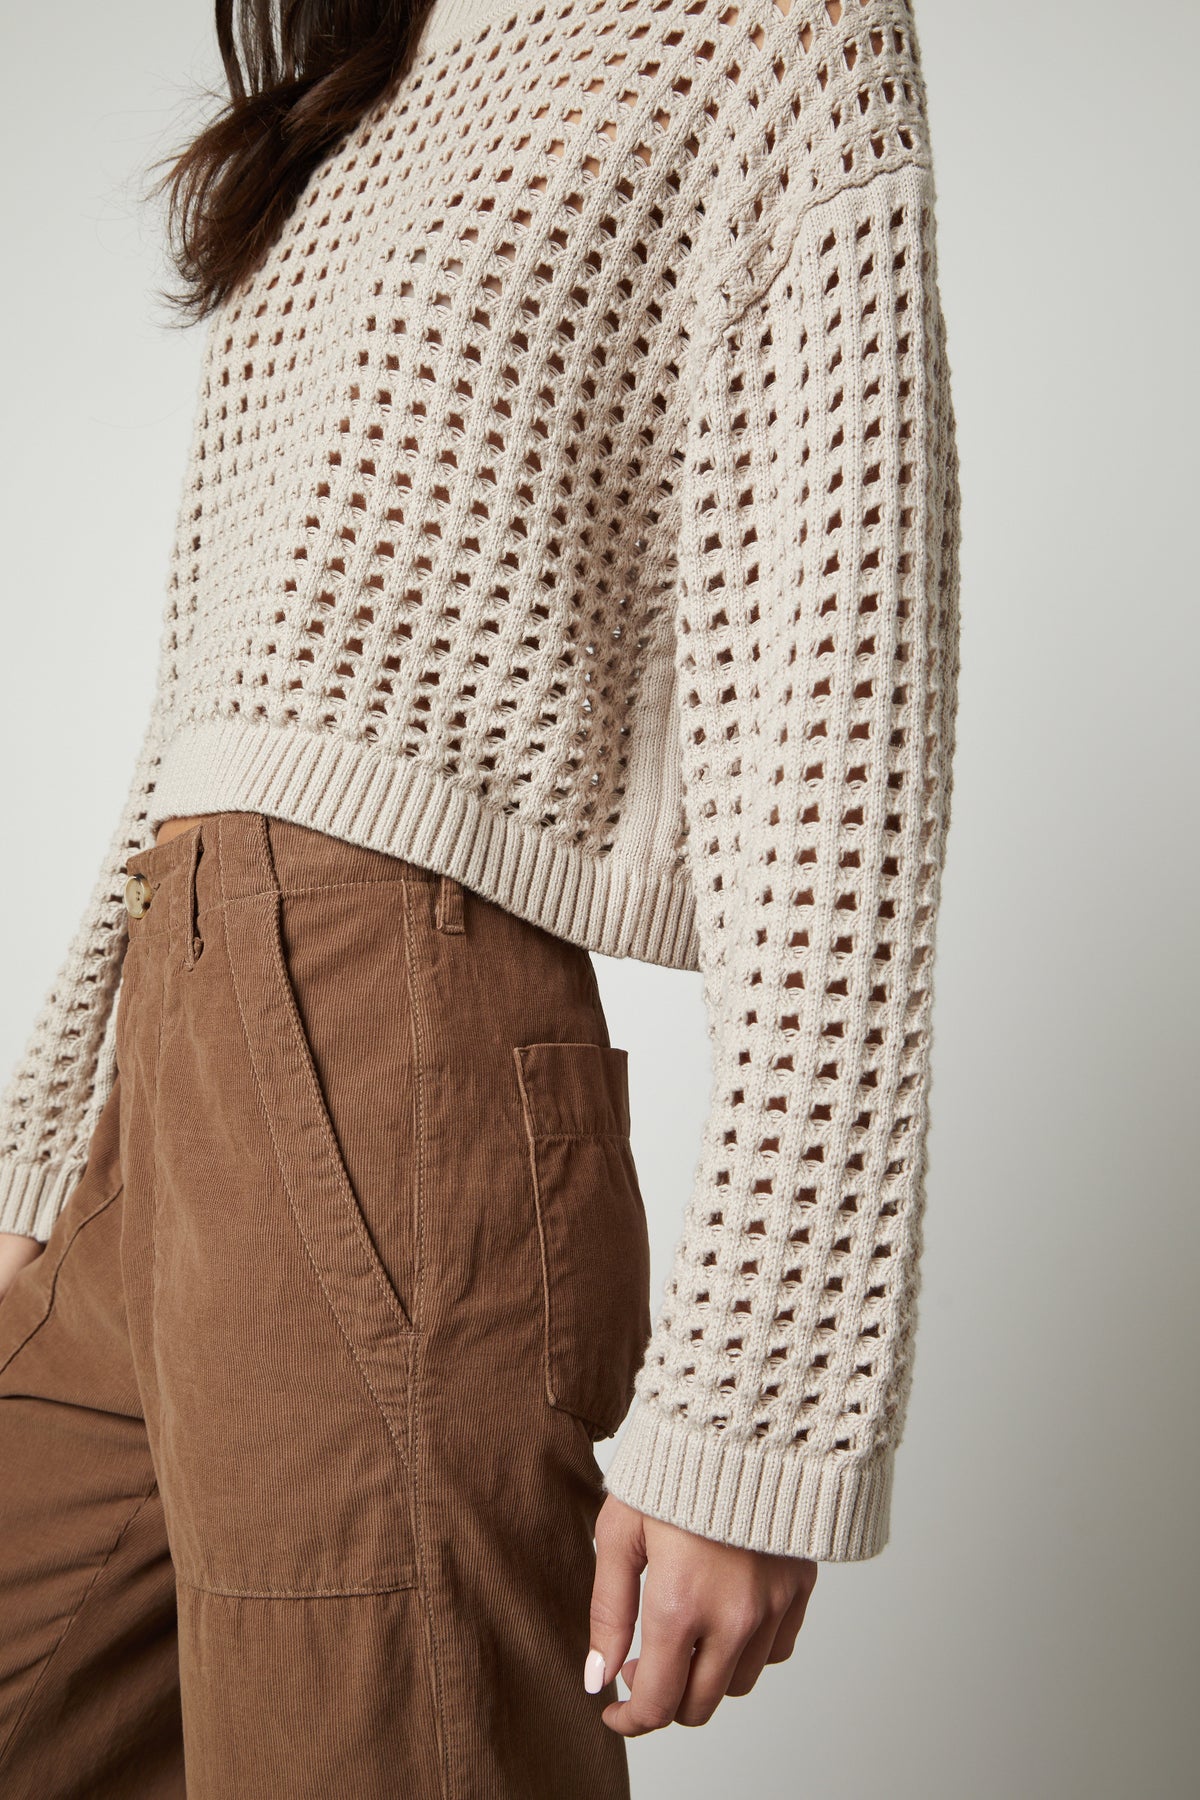 The model is wearing the Velvet by Graham & Spencer SAMMIE MESH KNIT CREW NECK SWEATER and brown pants.-26897858855105